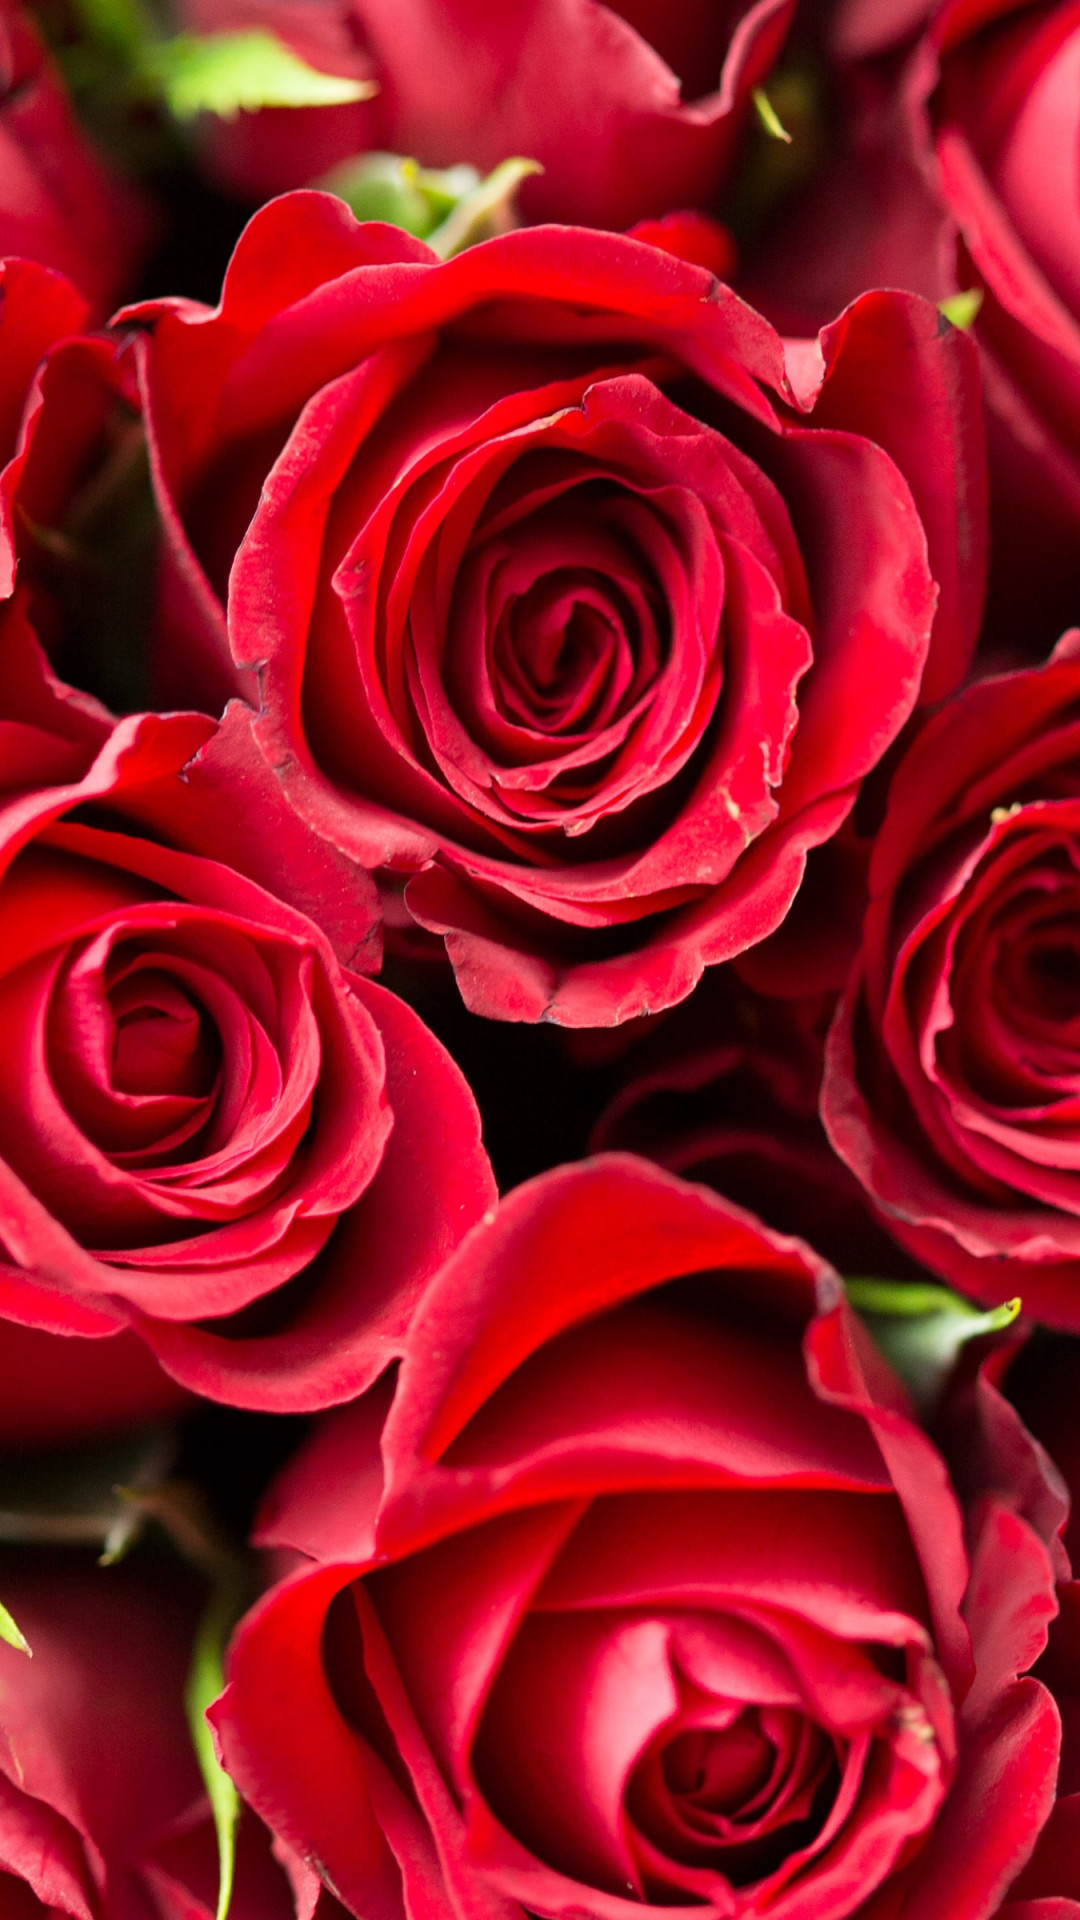 Lots of red roses wallpaper 1080x1920